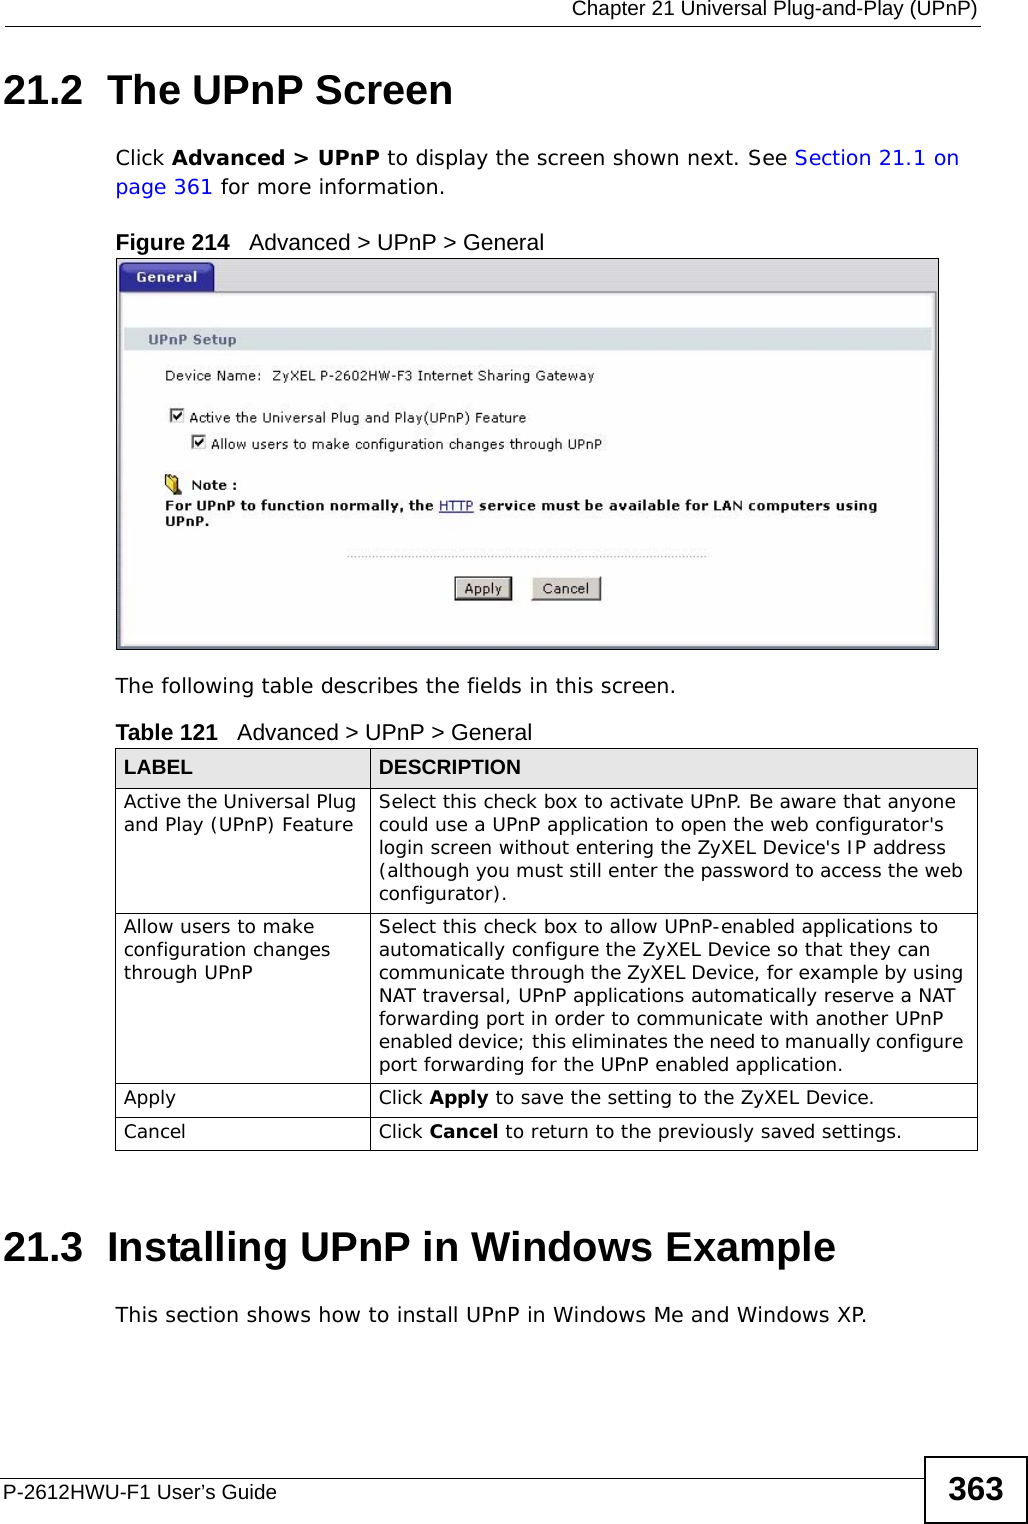  Chapter 21 Universal Plug-and-Play (UPnP)P-2612HWU-F1 User’s Guide 36321.2  The UPnP ScreenClick Advanced &gt; UPnP to display the screen shown next. See Section 21.1 on page 361 for more information. Figure 214   Advanced &gt; UPnP &gt; GeneralThe following table describes the fields in this screen. 21.3  Installing UPnP in Windows ExampleThis section shows how to install UPnP in Windows Me and Windows XP.  Table 121   Advanced &gt; UPnP &gt; GeneralLABEL DESCRIPTIONActive the Universal Plug and Play (UPnP) Feature Select this check box to activate UPnP. Be aware that anyone could use a UPnP application to open the web configurator&apos;s login screen without entering the ZyXEL Device&apos;s IP address (although you must still enter the password to access the web configurator).Allow users to make configuration changes through UPnPSelect this check box to allow UPnP-enabled applications to automatically configure the ZyXEL Device so that they can communicate through the ZyXEL Device, for example by using NAT traversal, UPnP applications automatically reserve a NAT forwarding port in order to communicate with another UPnP enabled device; this eliminates the need to manually configure port forwarding for the UPnP enabled application. Apply Click Apply to save the setting to the ZyXEL Device.Cancel Click Cancel to return to the previously saved settings.